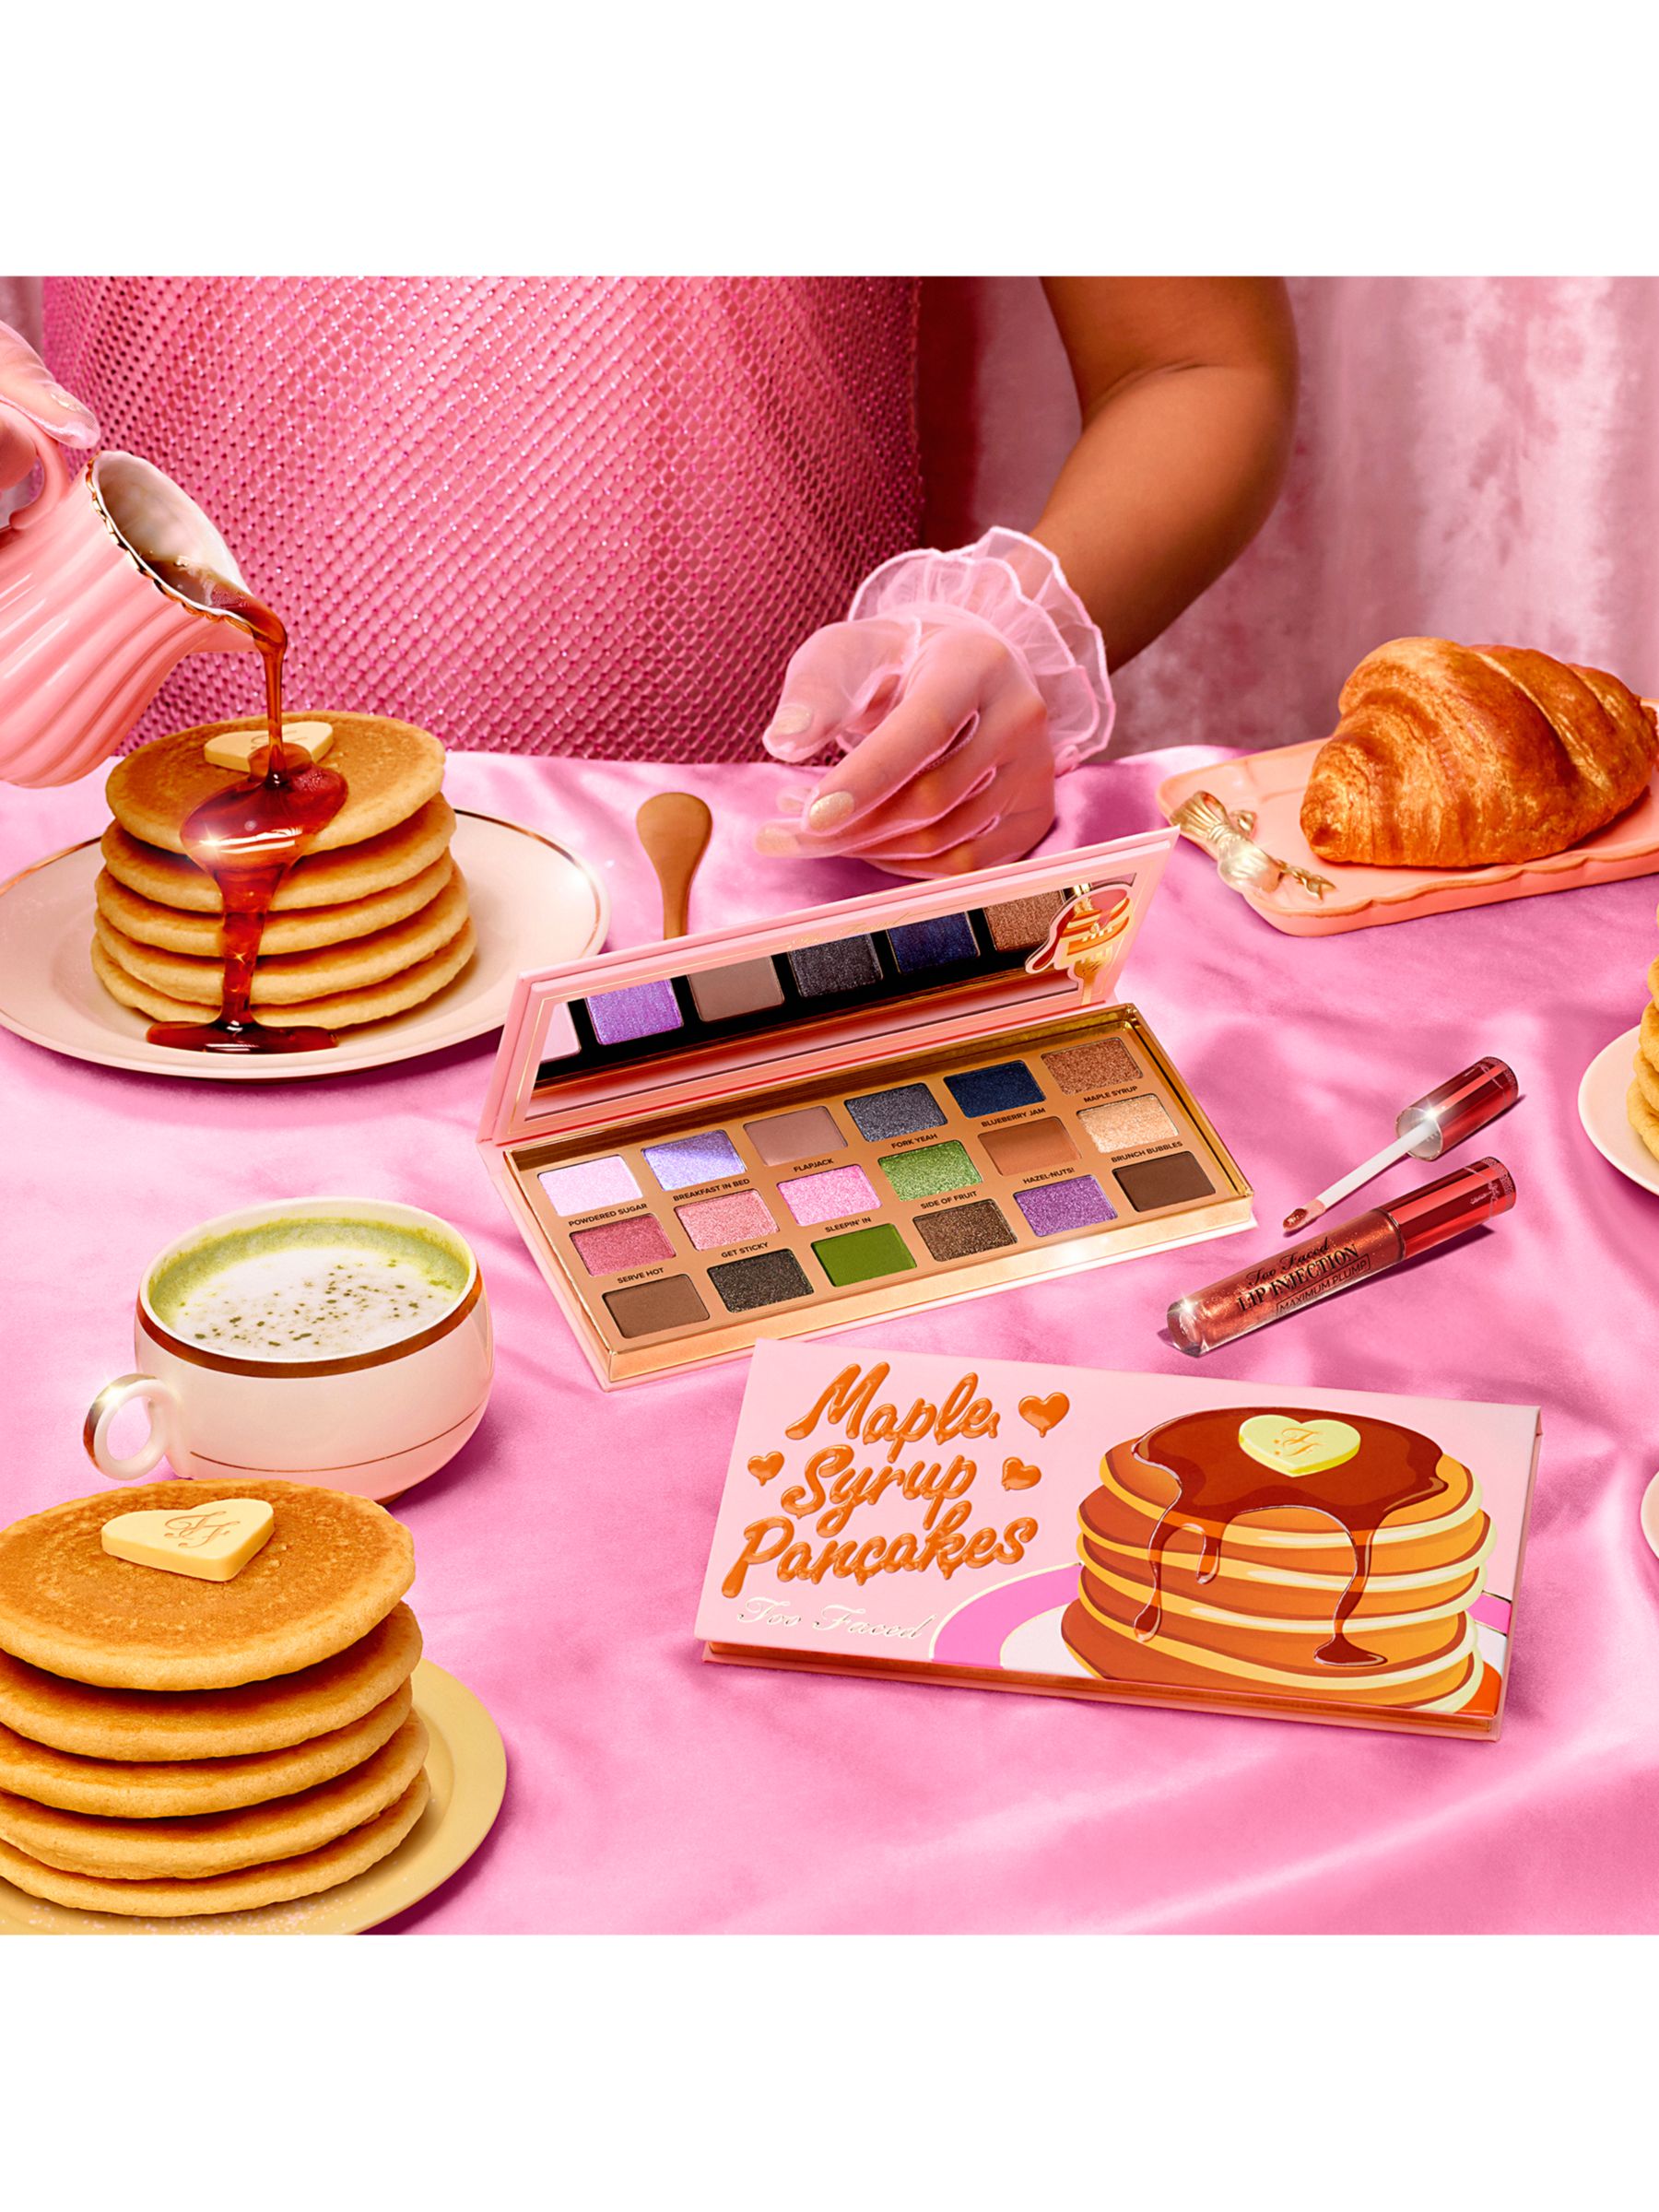 Too Faced Limited Edition Eyeshadow Palette, Maple Syrup Pancakes 7